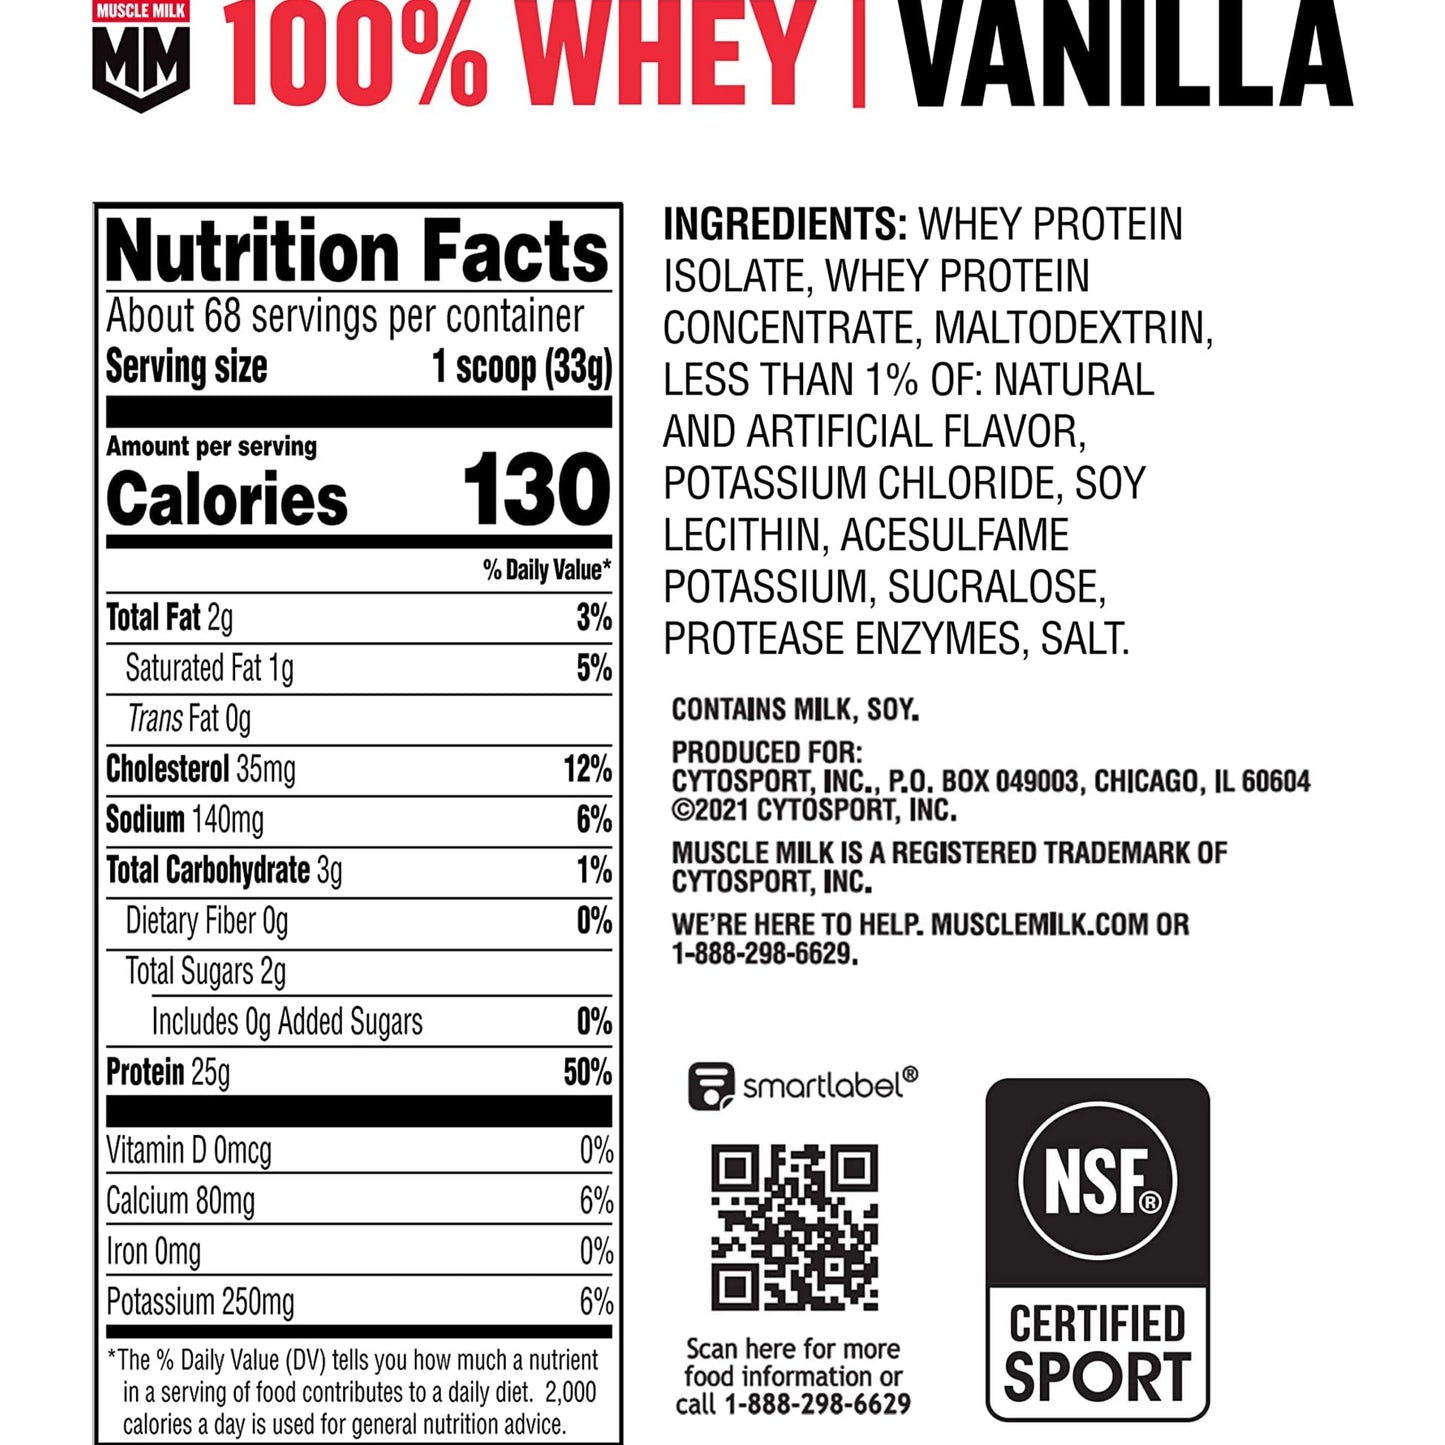 [Multiple Flavors] Muscle Milk 100% Whey Protein Powder (5 lbs)